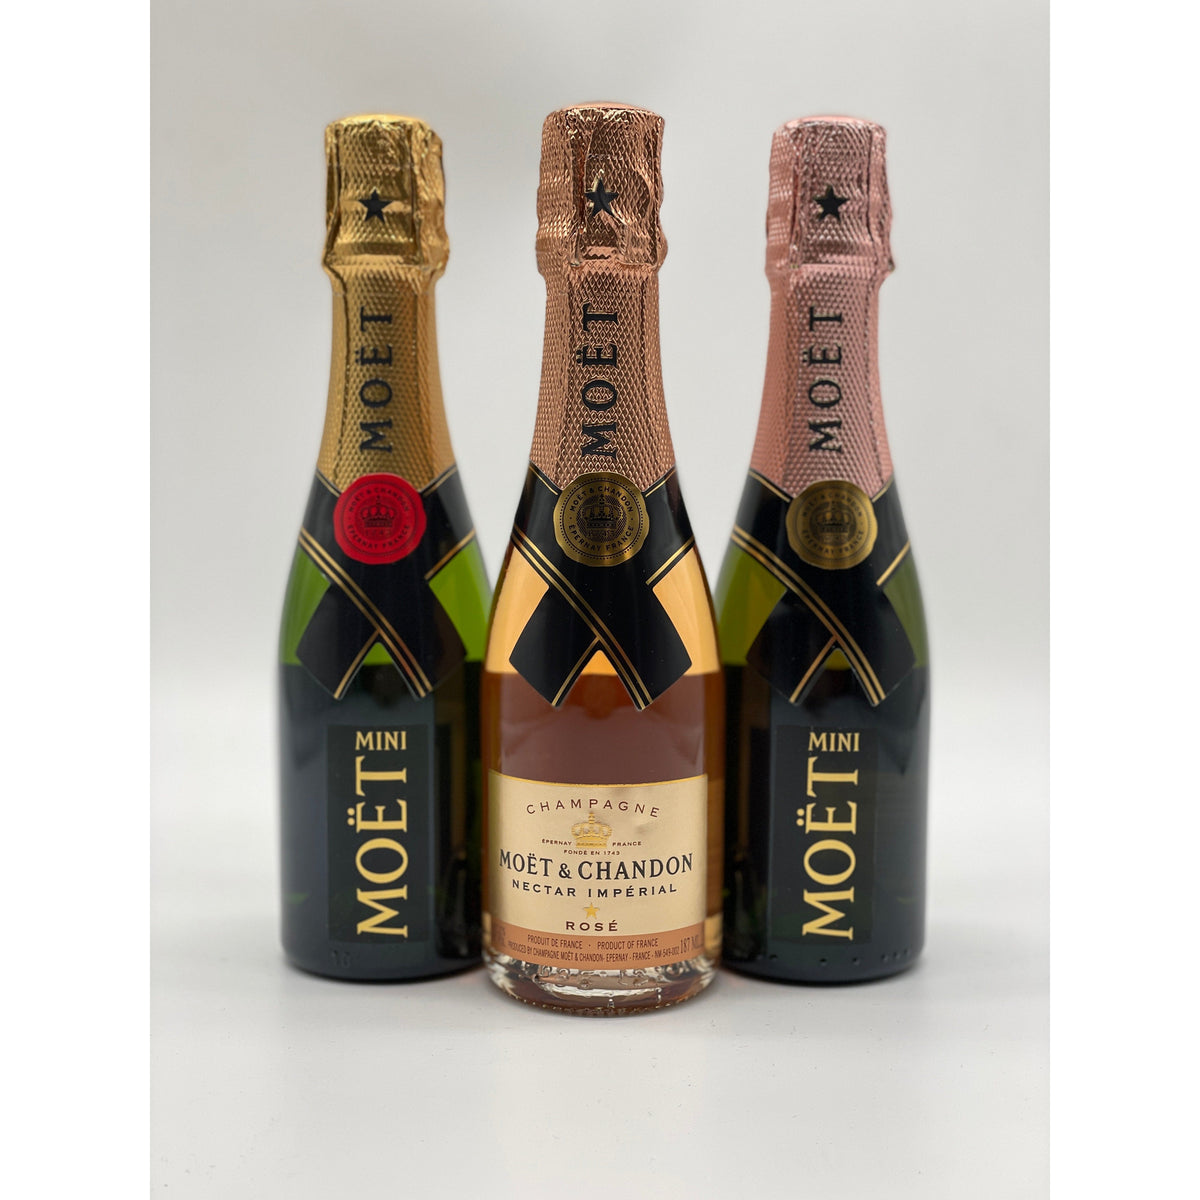 Moet and Chandon Imperial Brut Champagne NV 187 ml